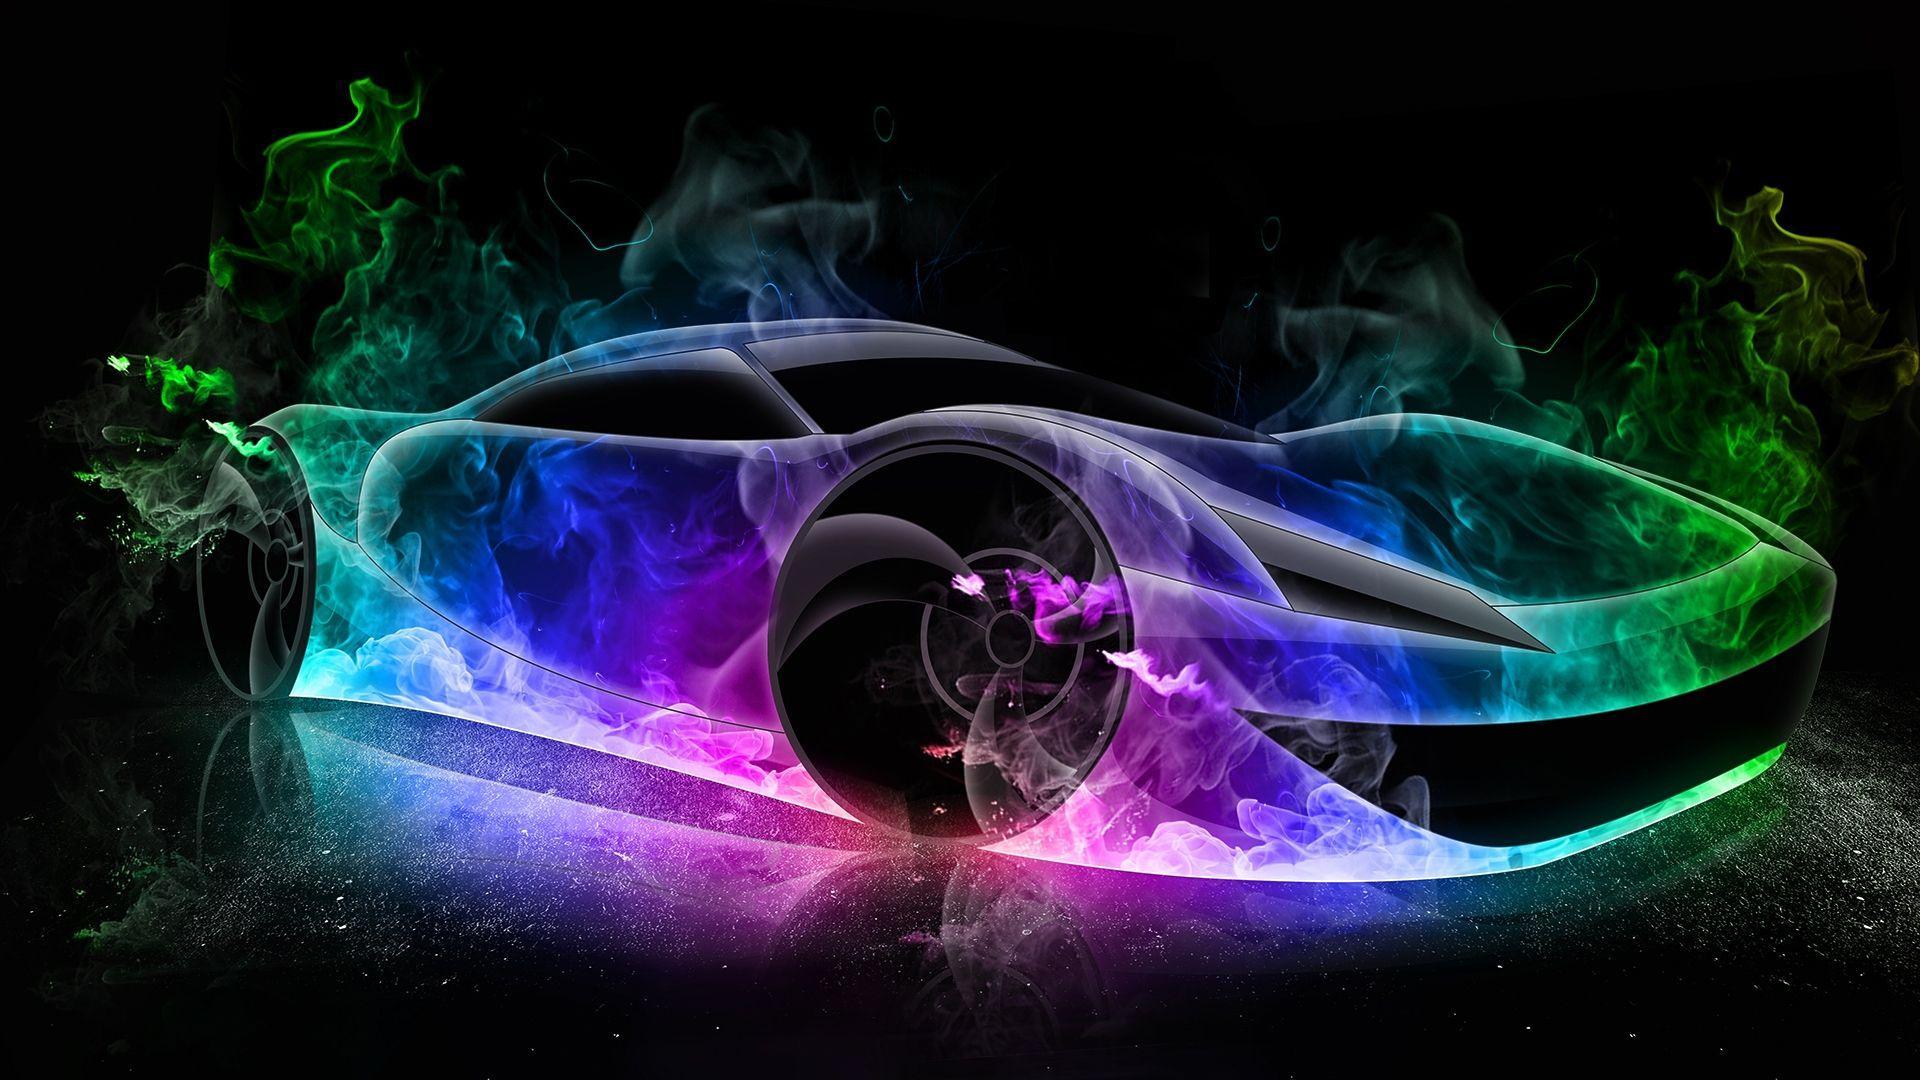 Awesome Cars Wallpapers Wallpaper Cave